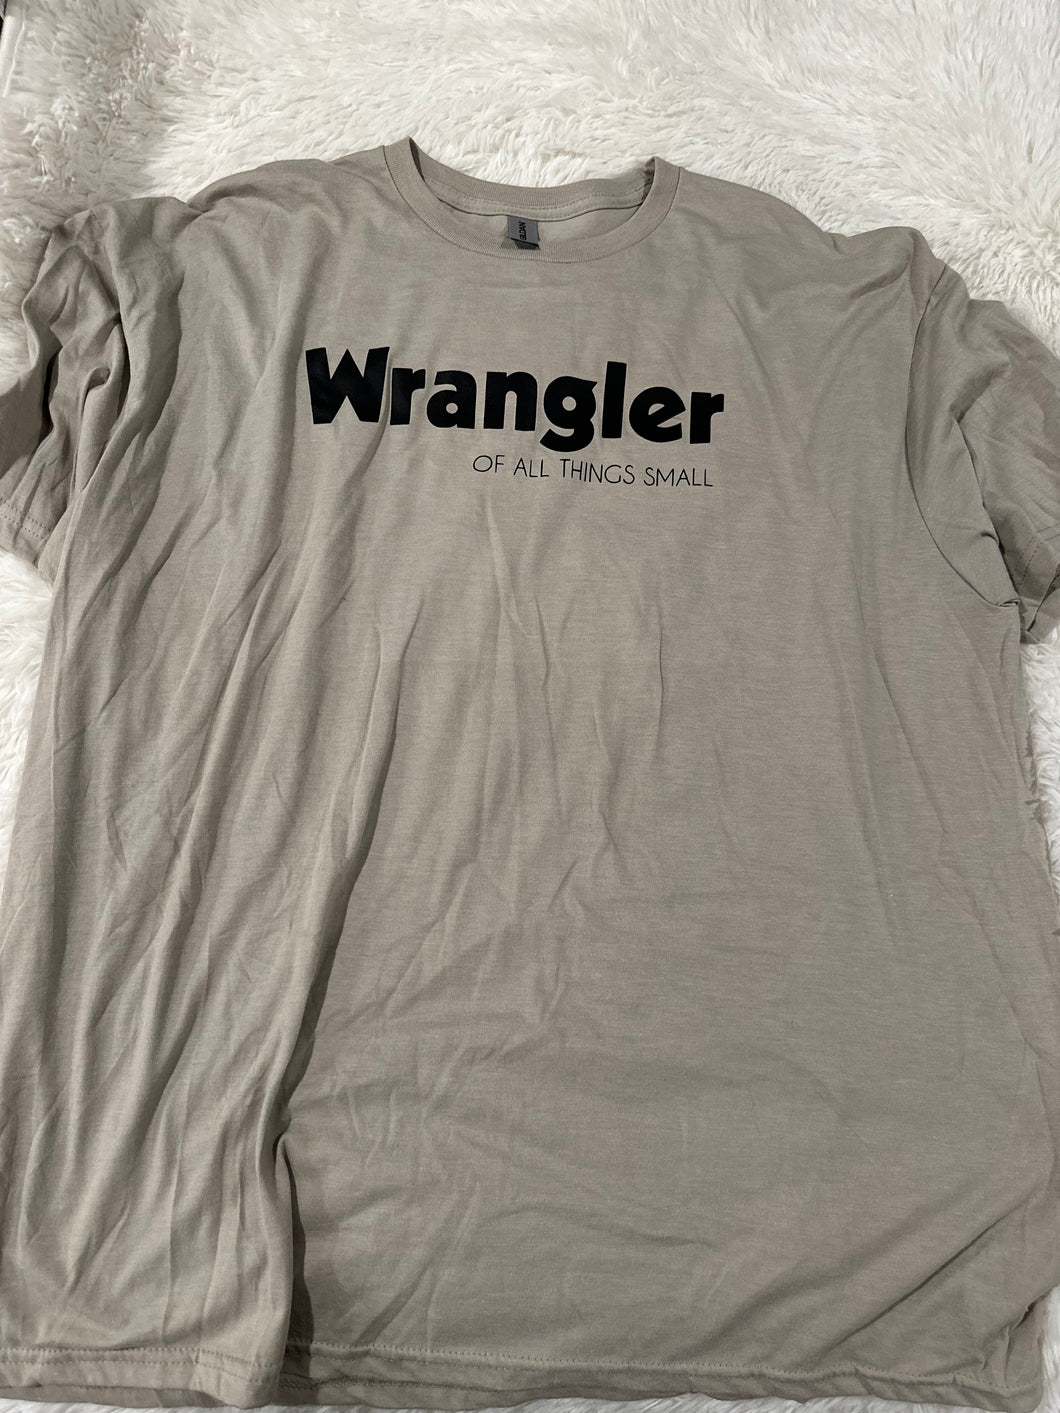 wrangler of all things small t-shirt - LARGE